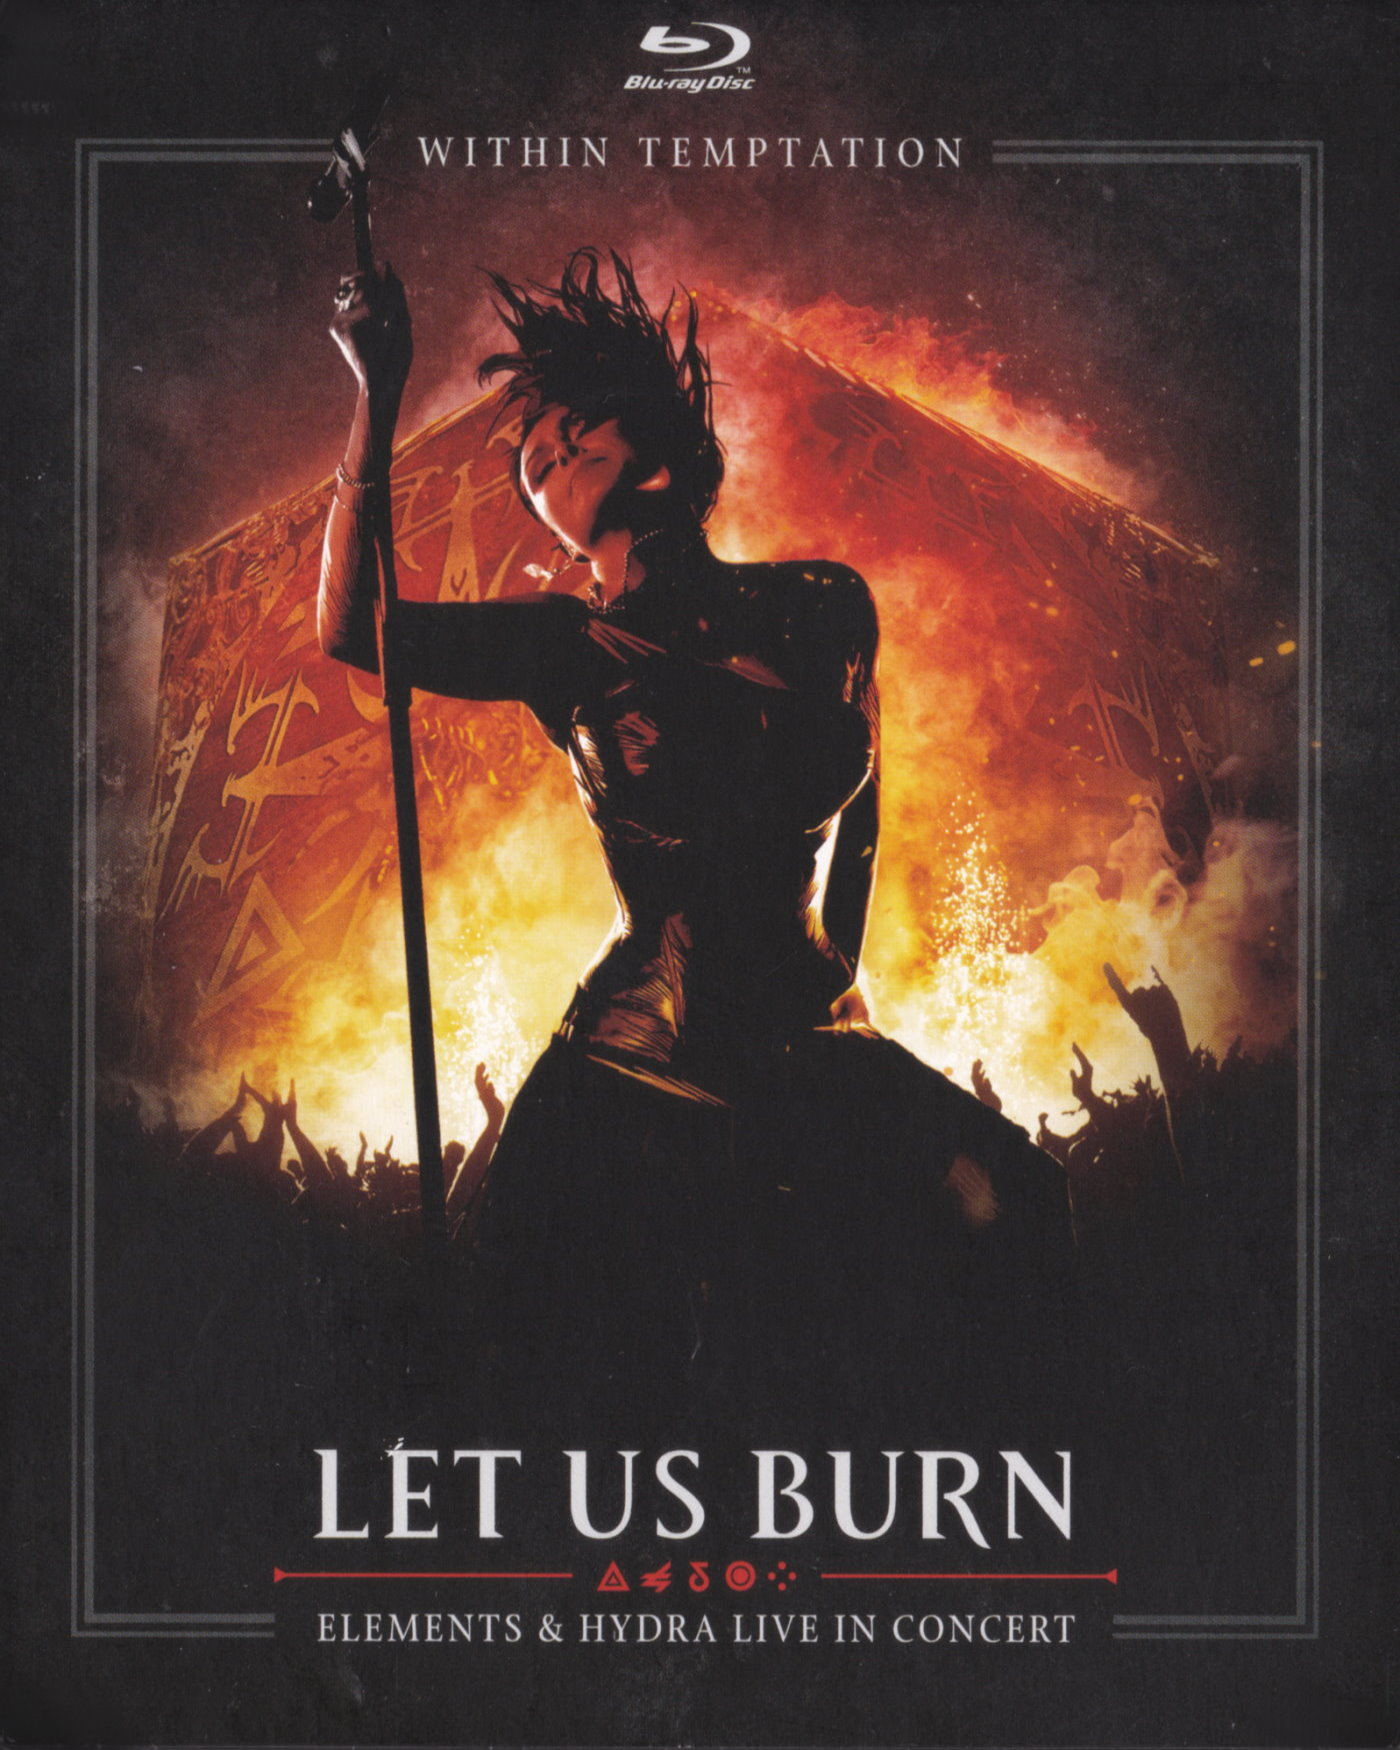 Cover - Within Temptation - Let Us Burn - Elements & Hydra Live in Concert.jpg